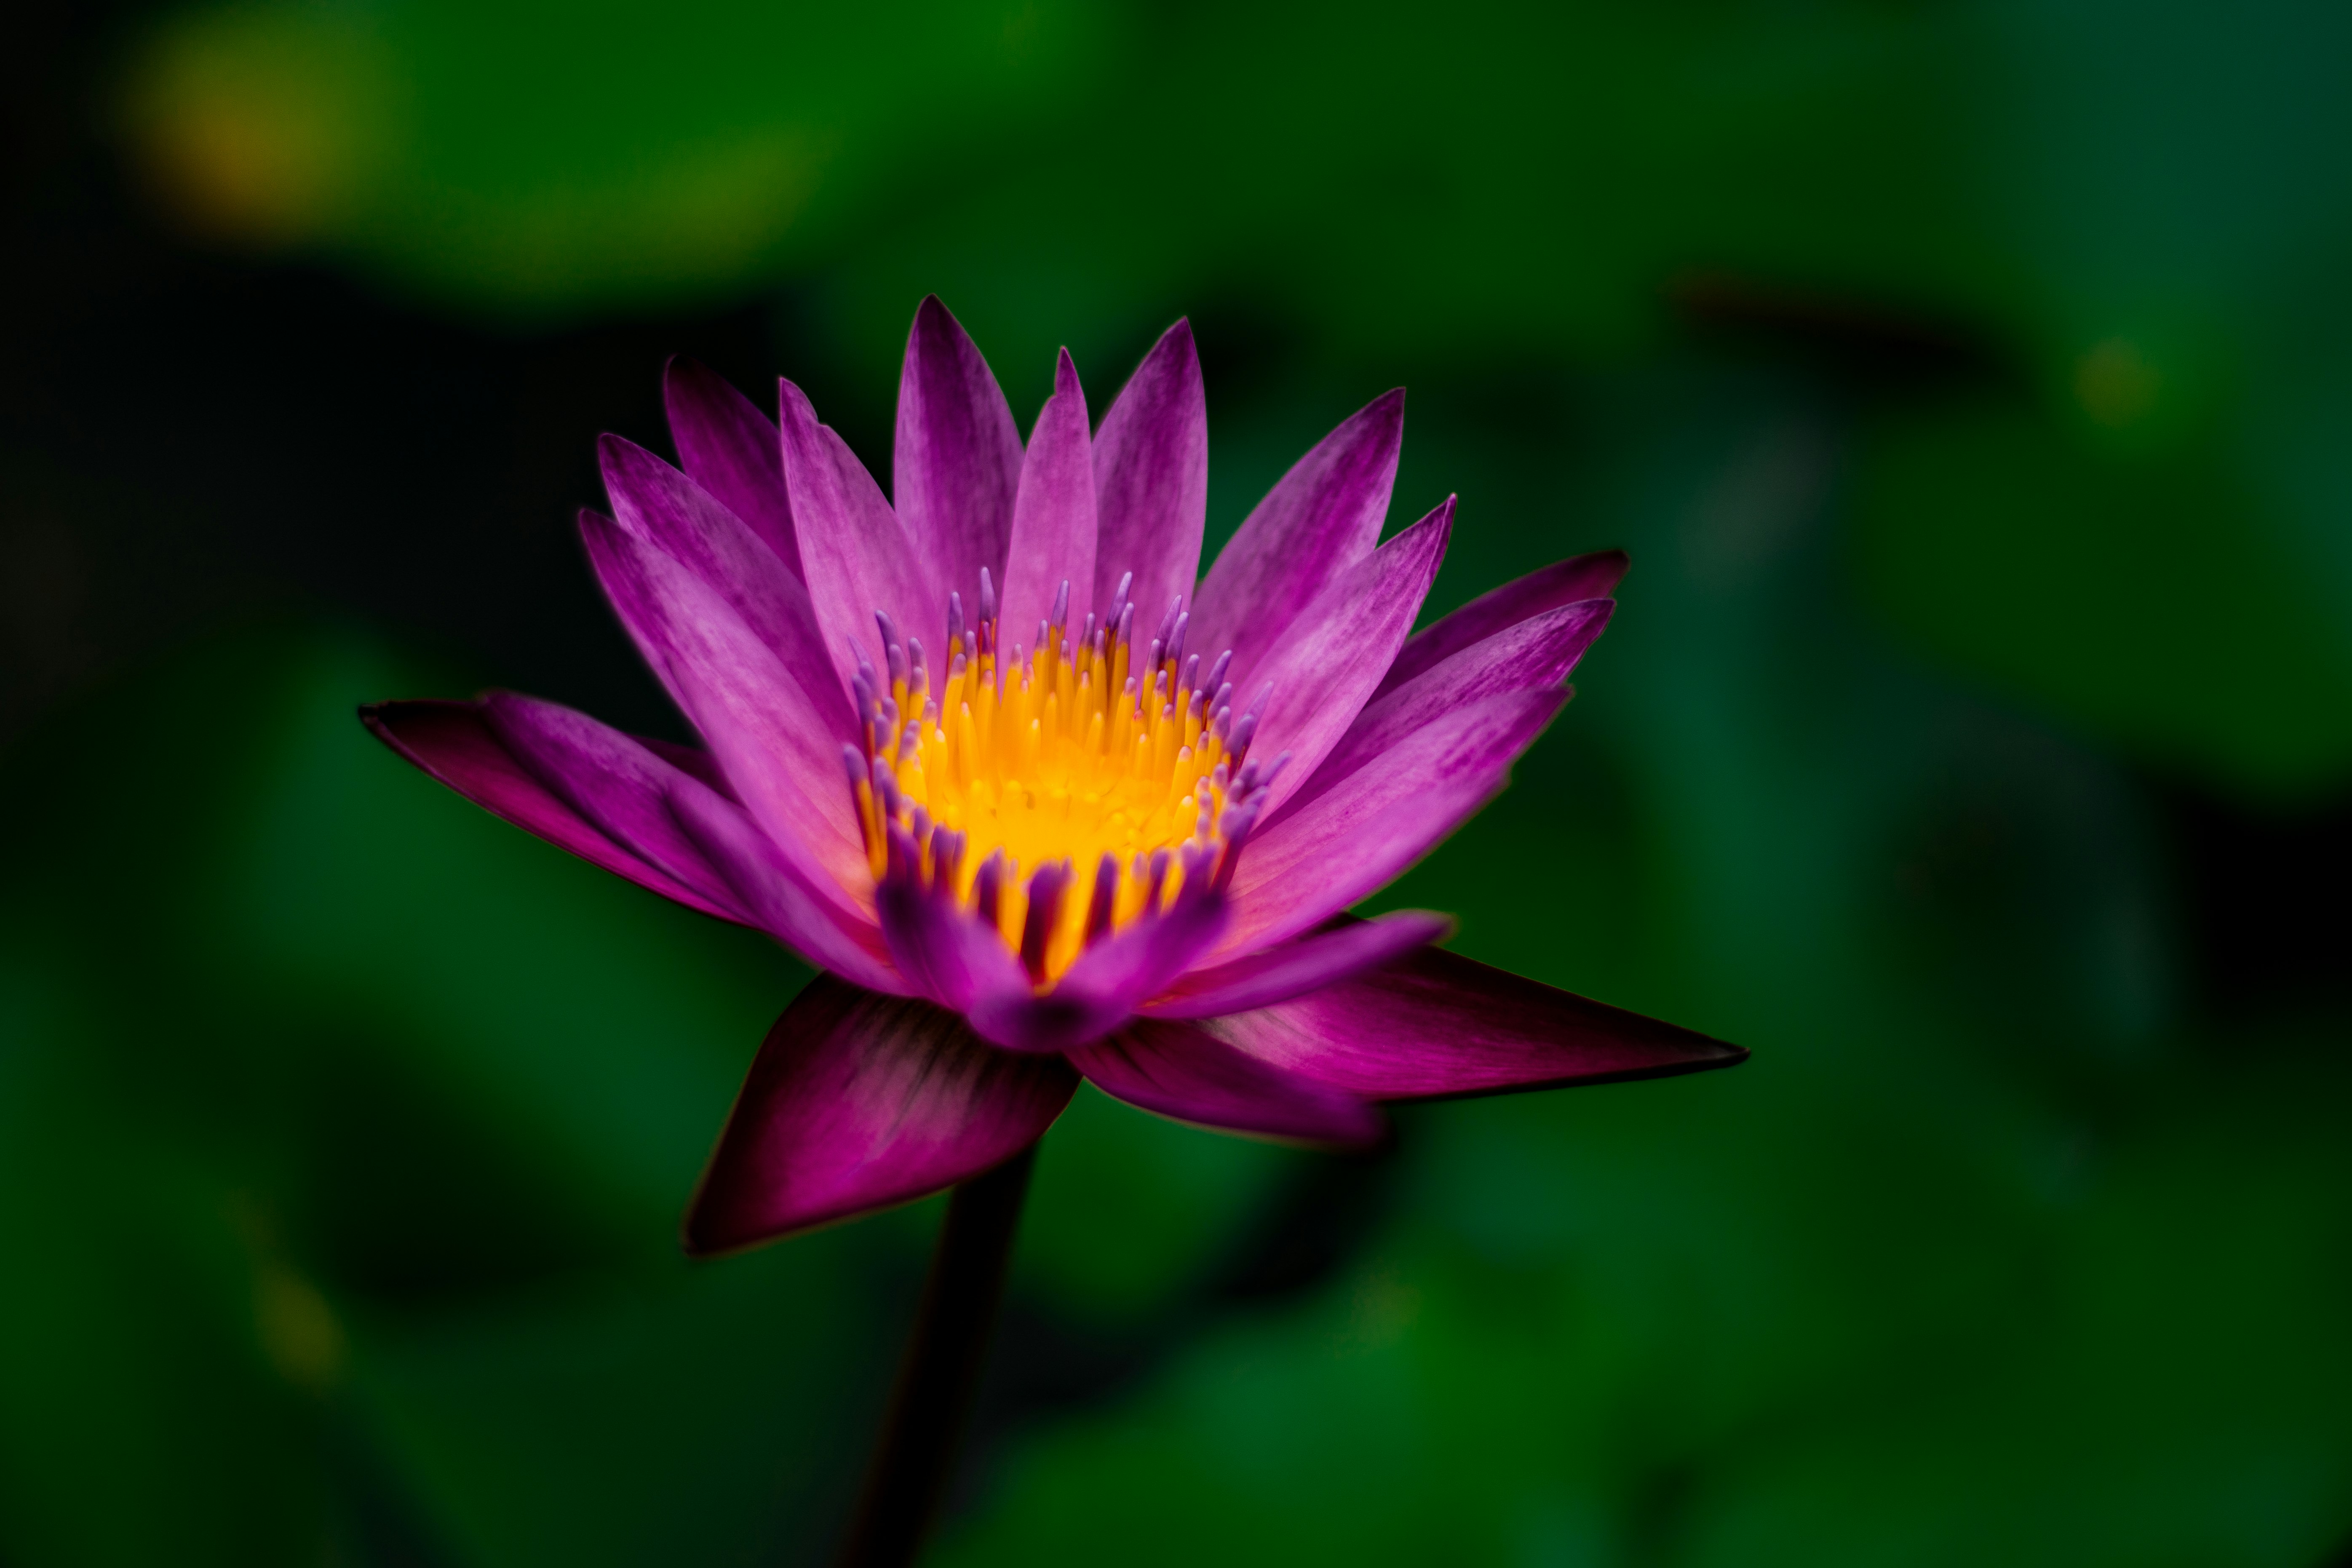 selective focus photography of purple and yellow petaled flower